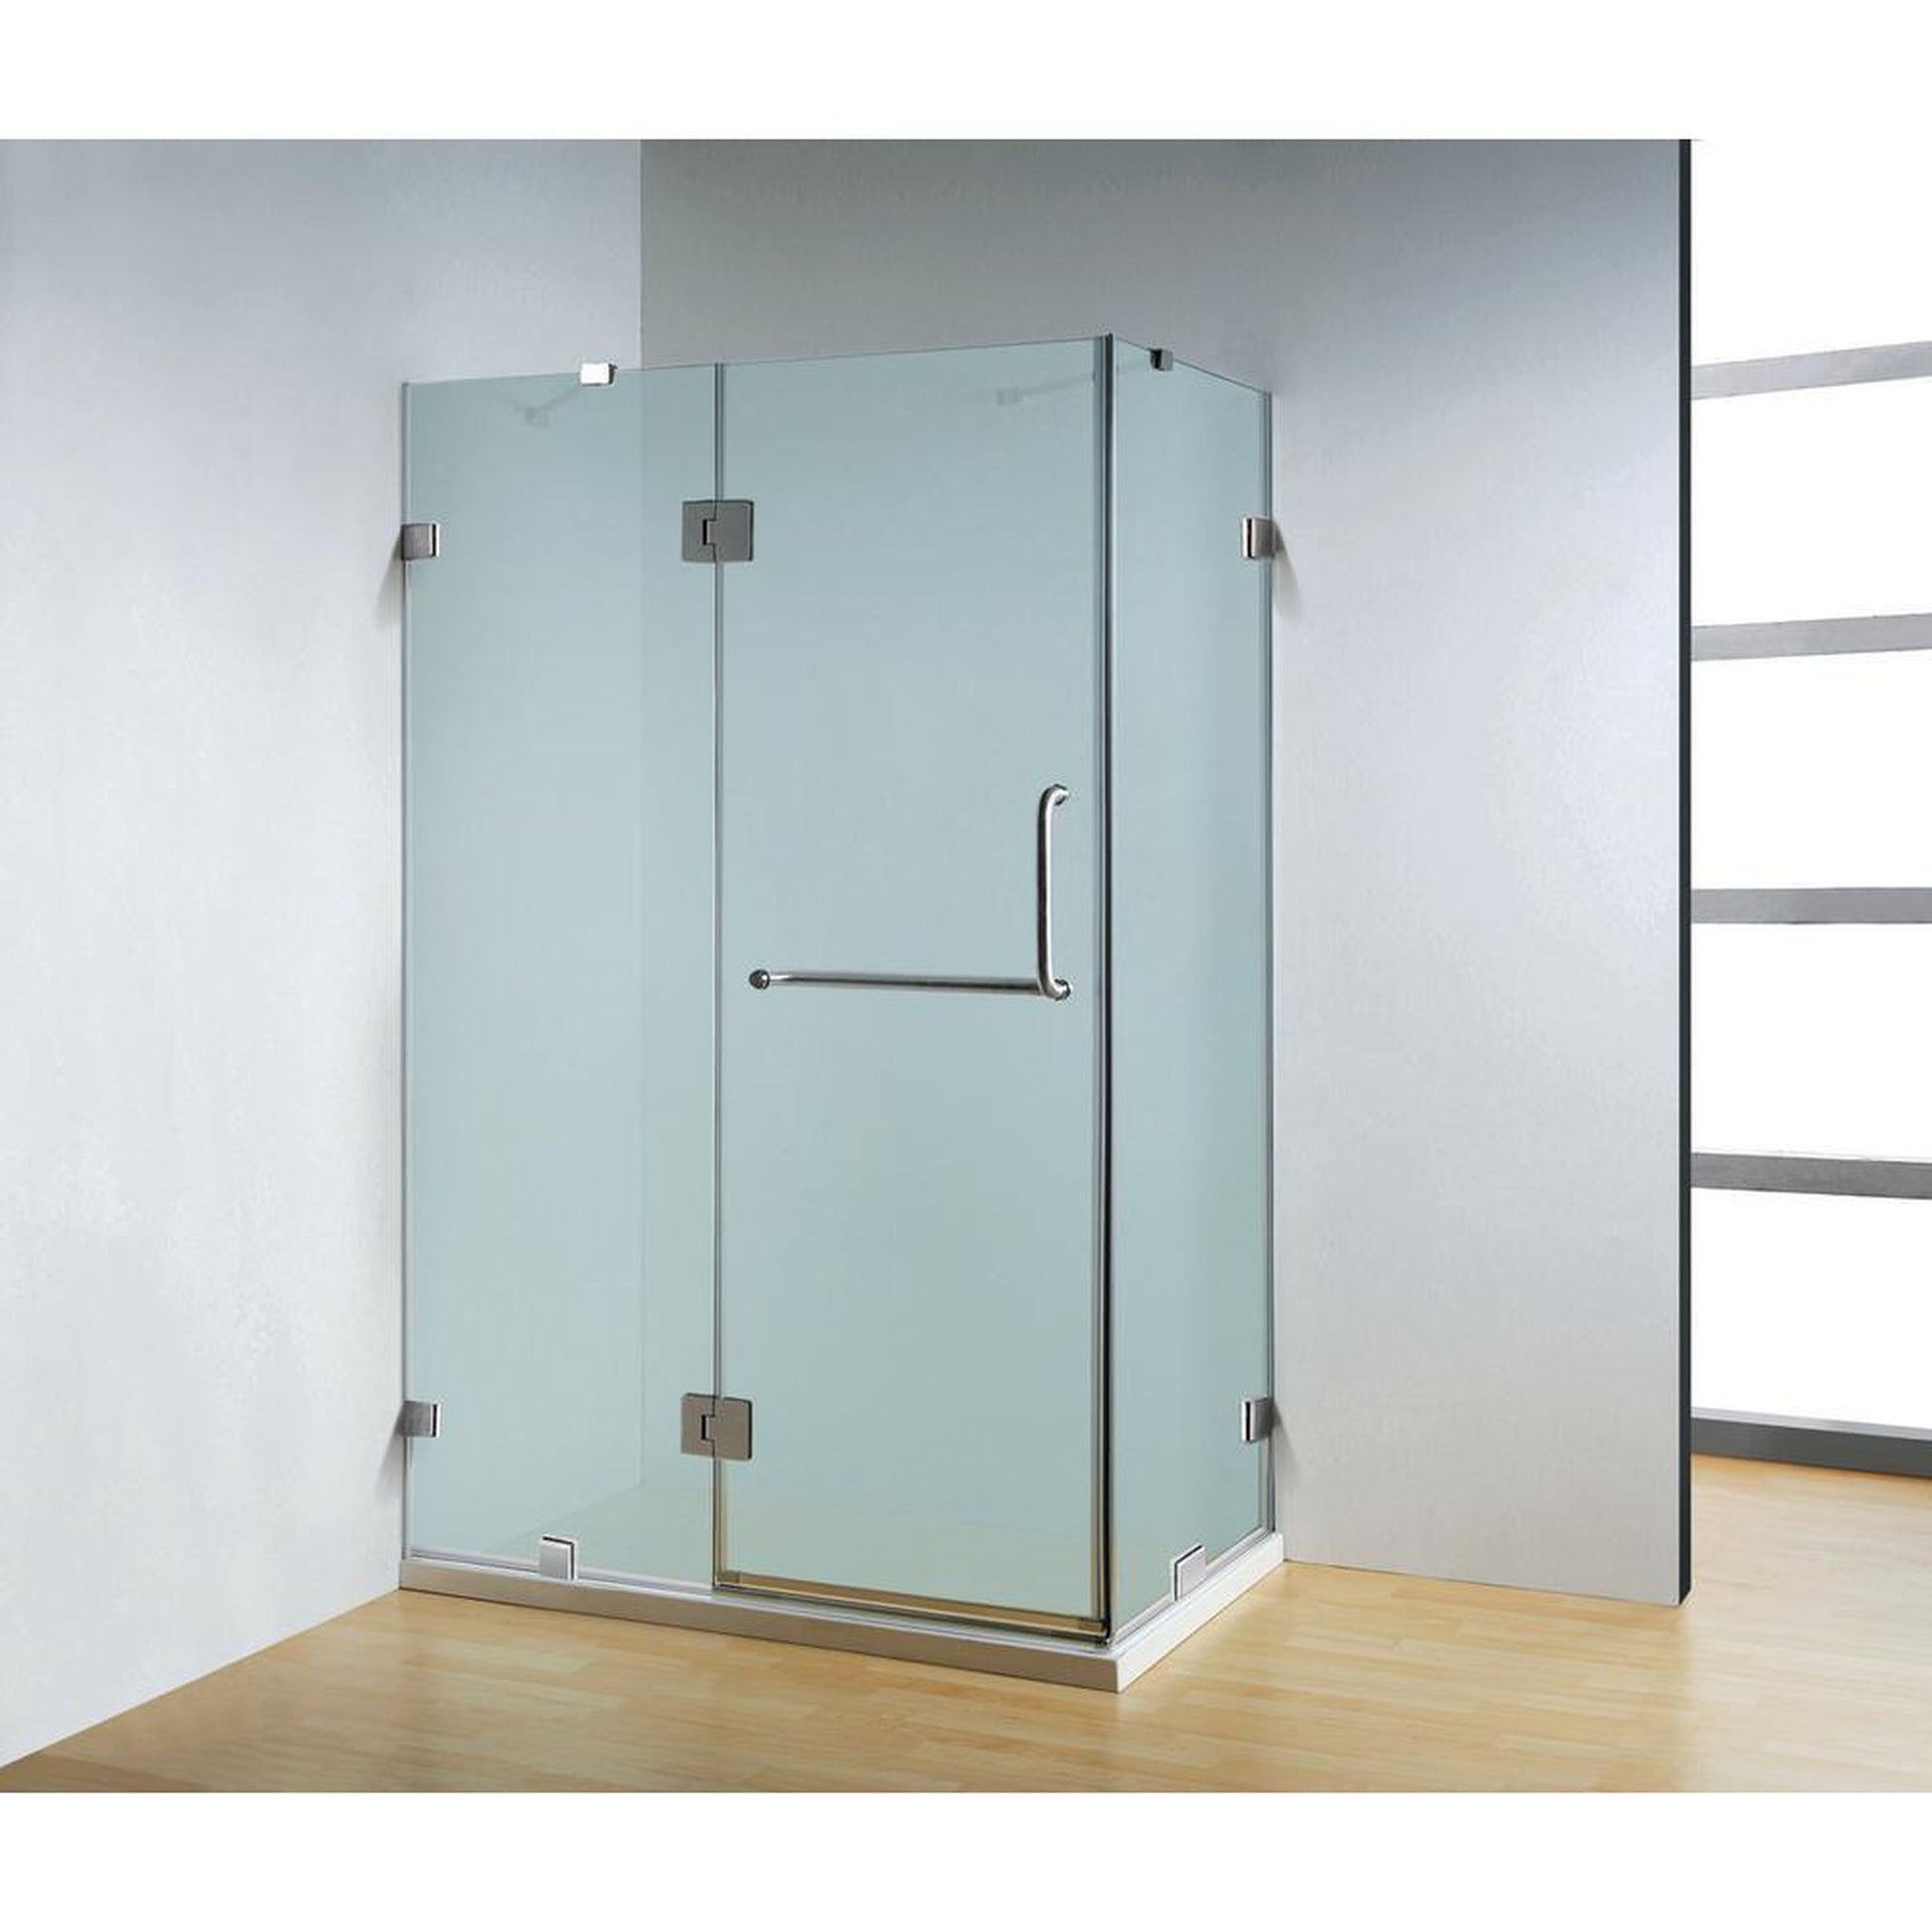 Dreamwerks 47" x 79" Frosted Glass Frameless Neo-Angle Hinged Shower Door With Chrome Handle